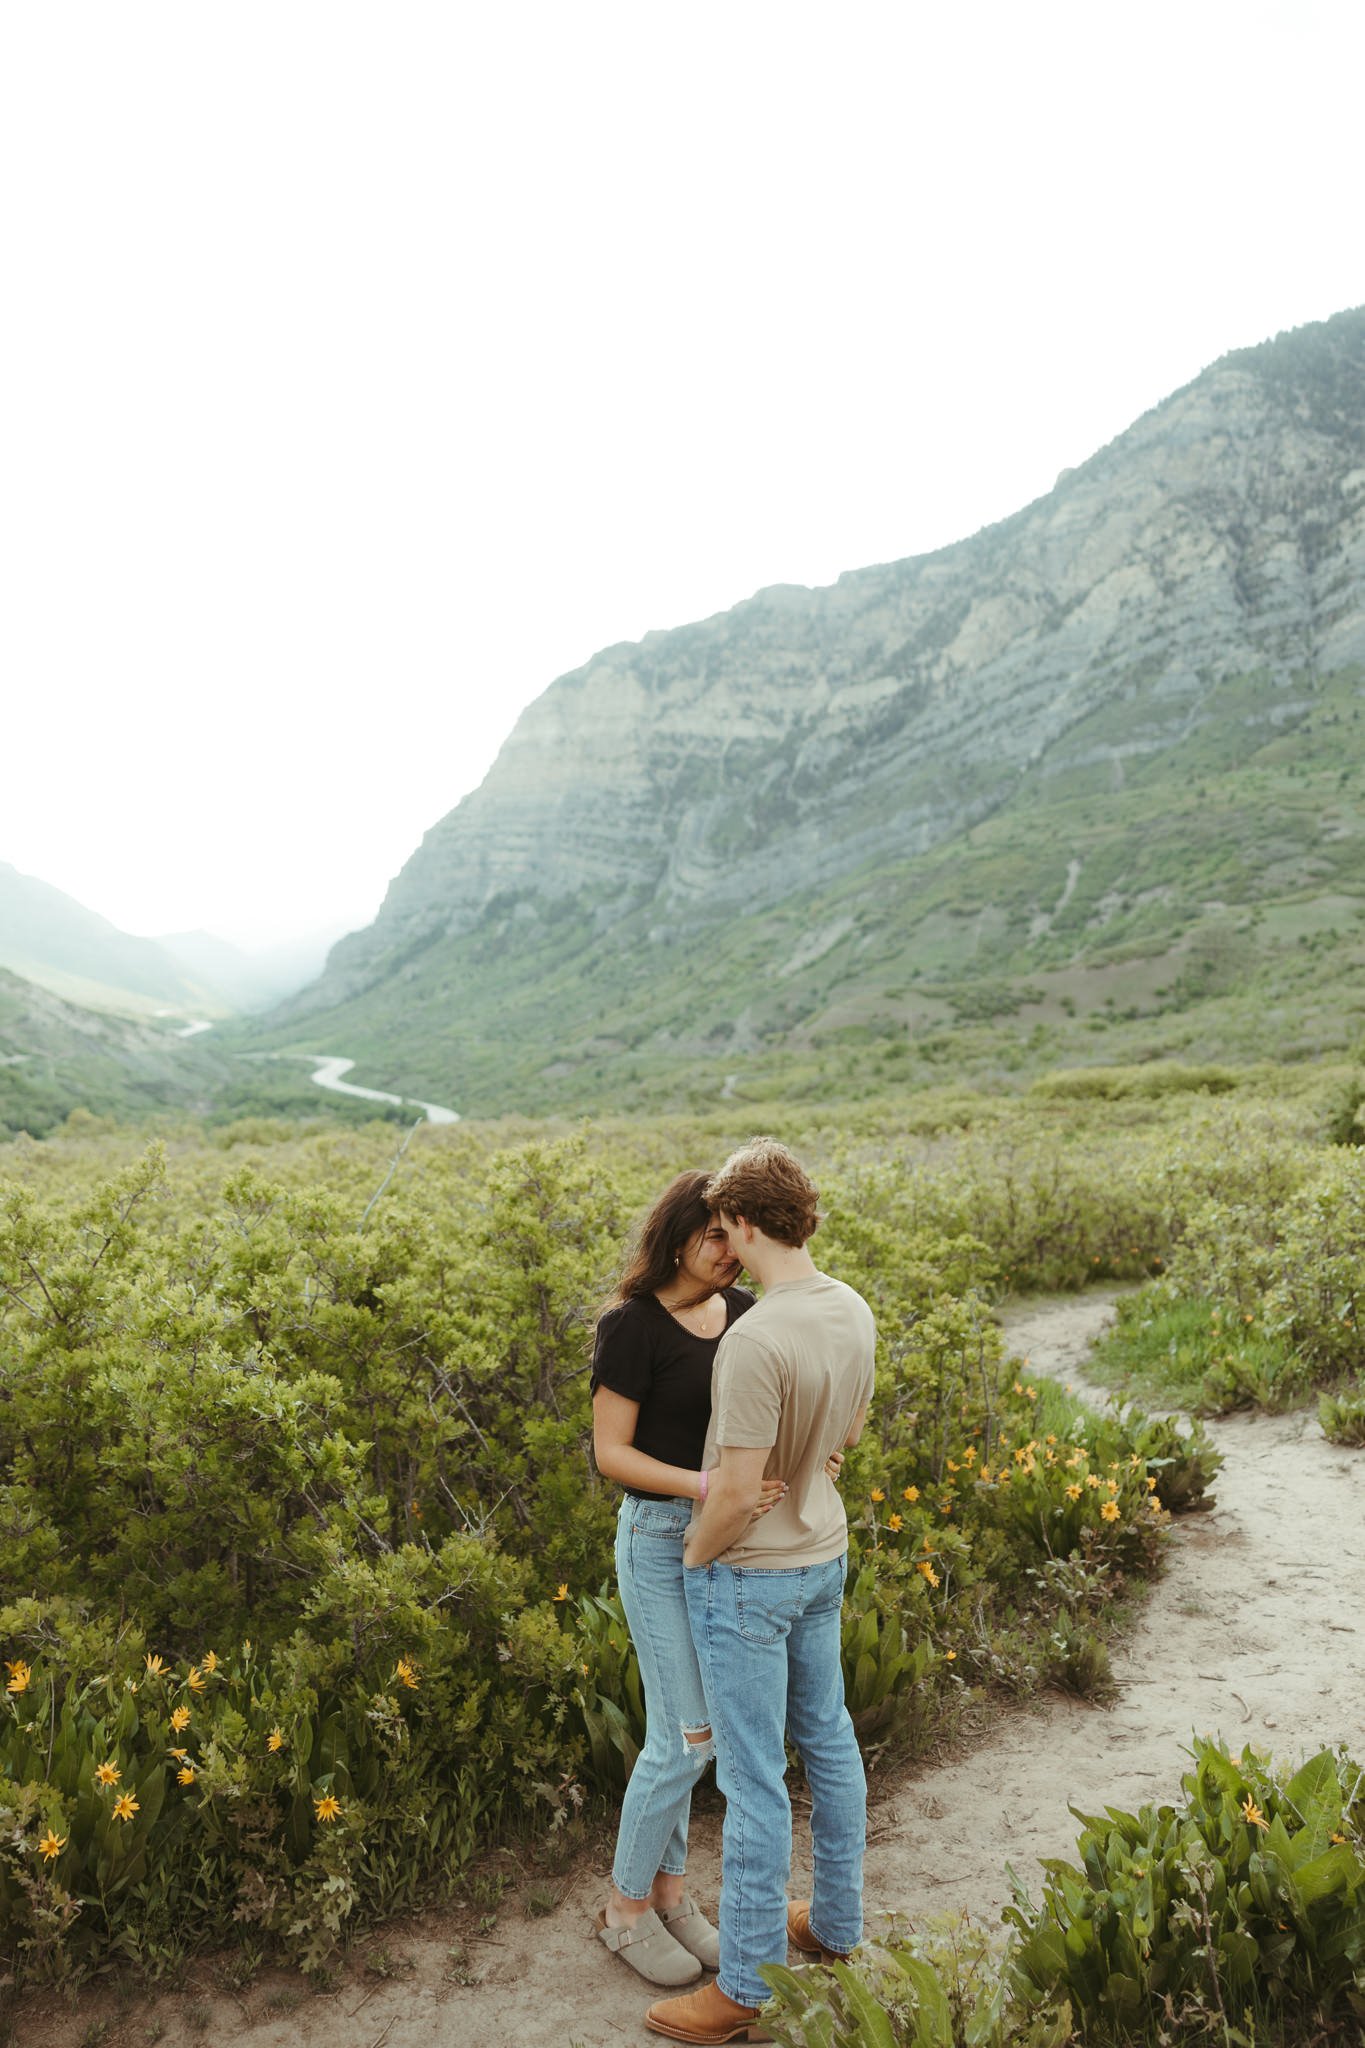 Spring-Provo-Canyon-Wildflowers-Engagement-Session-32